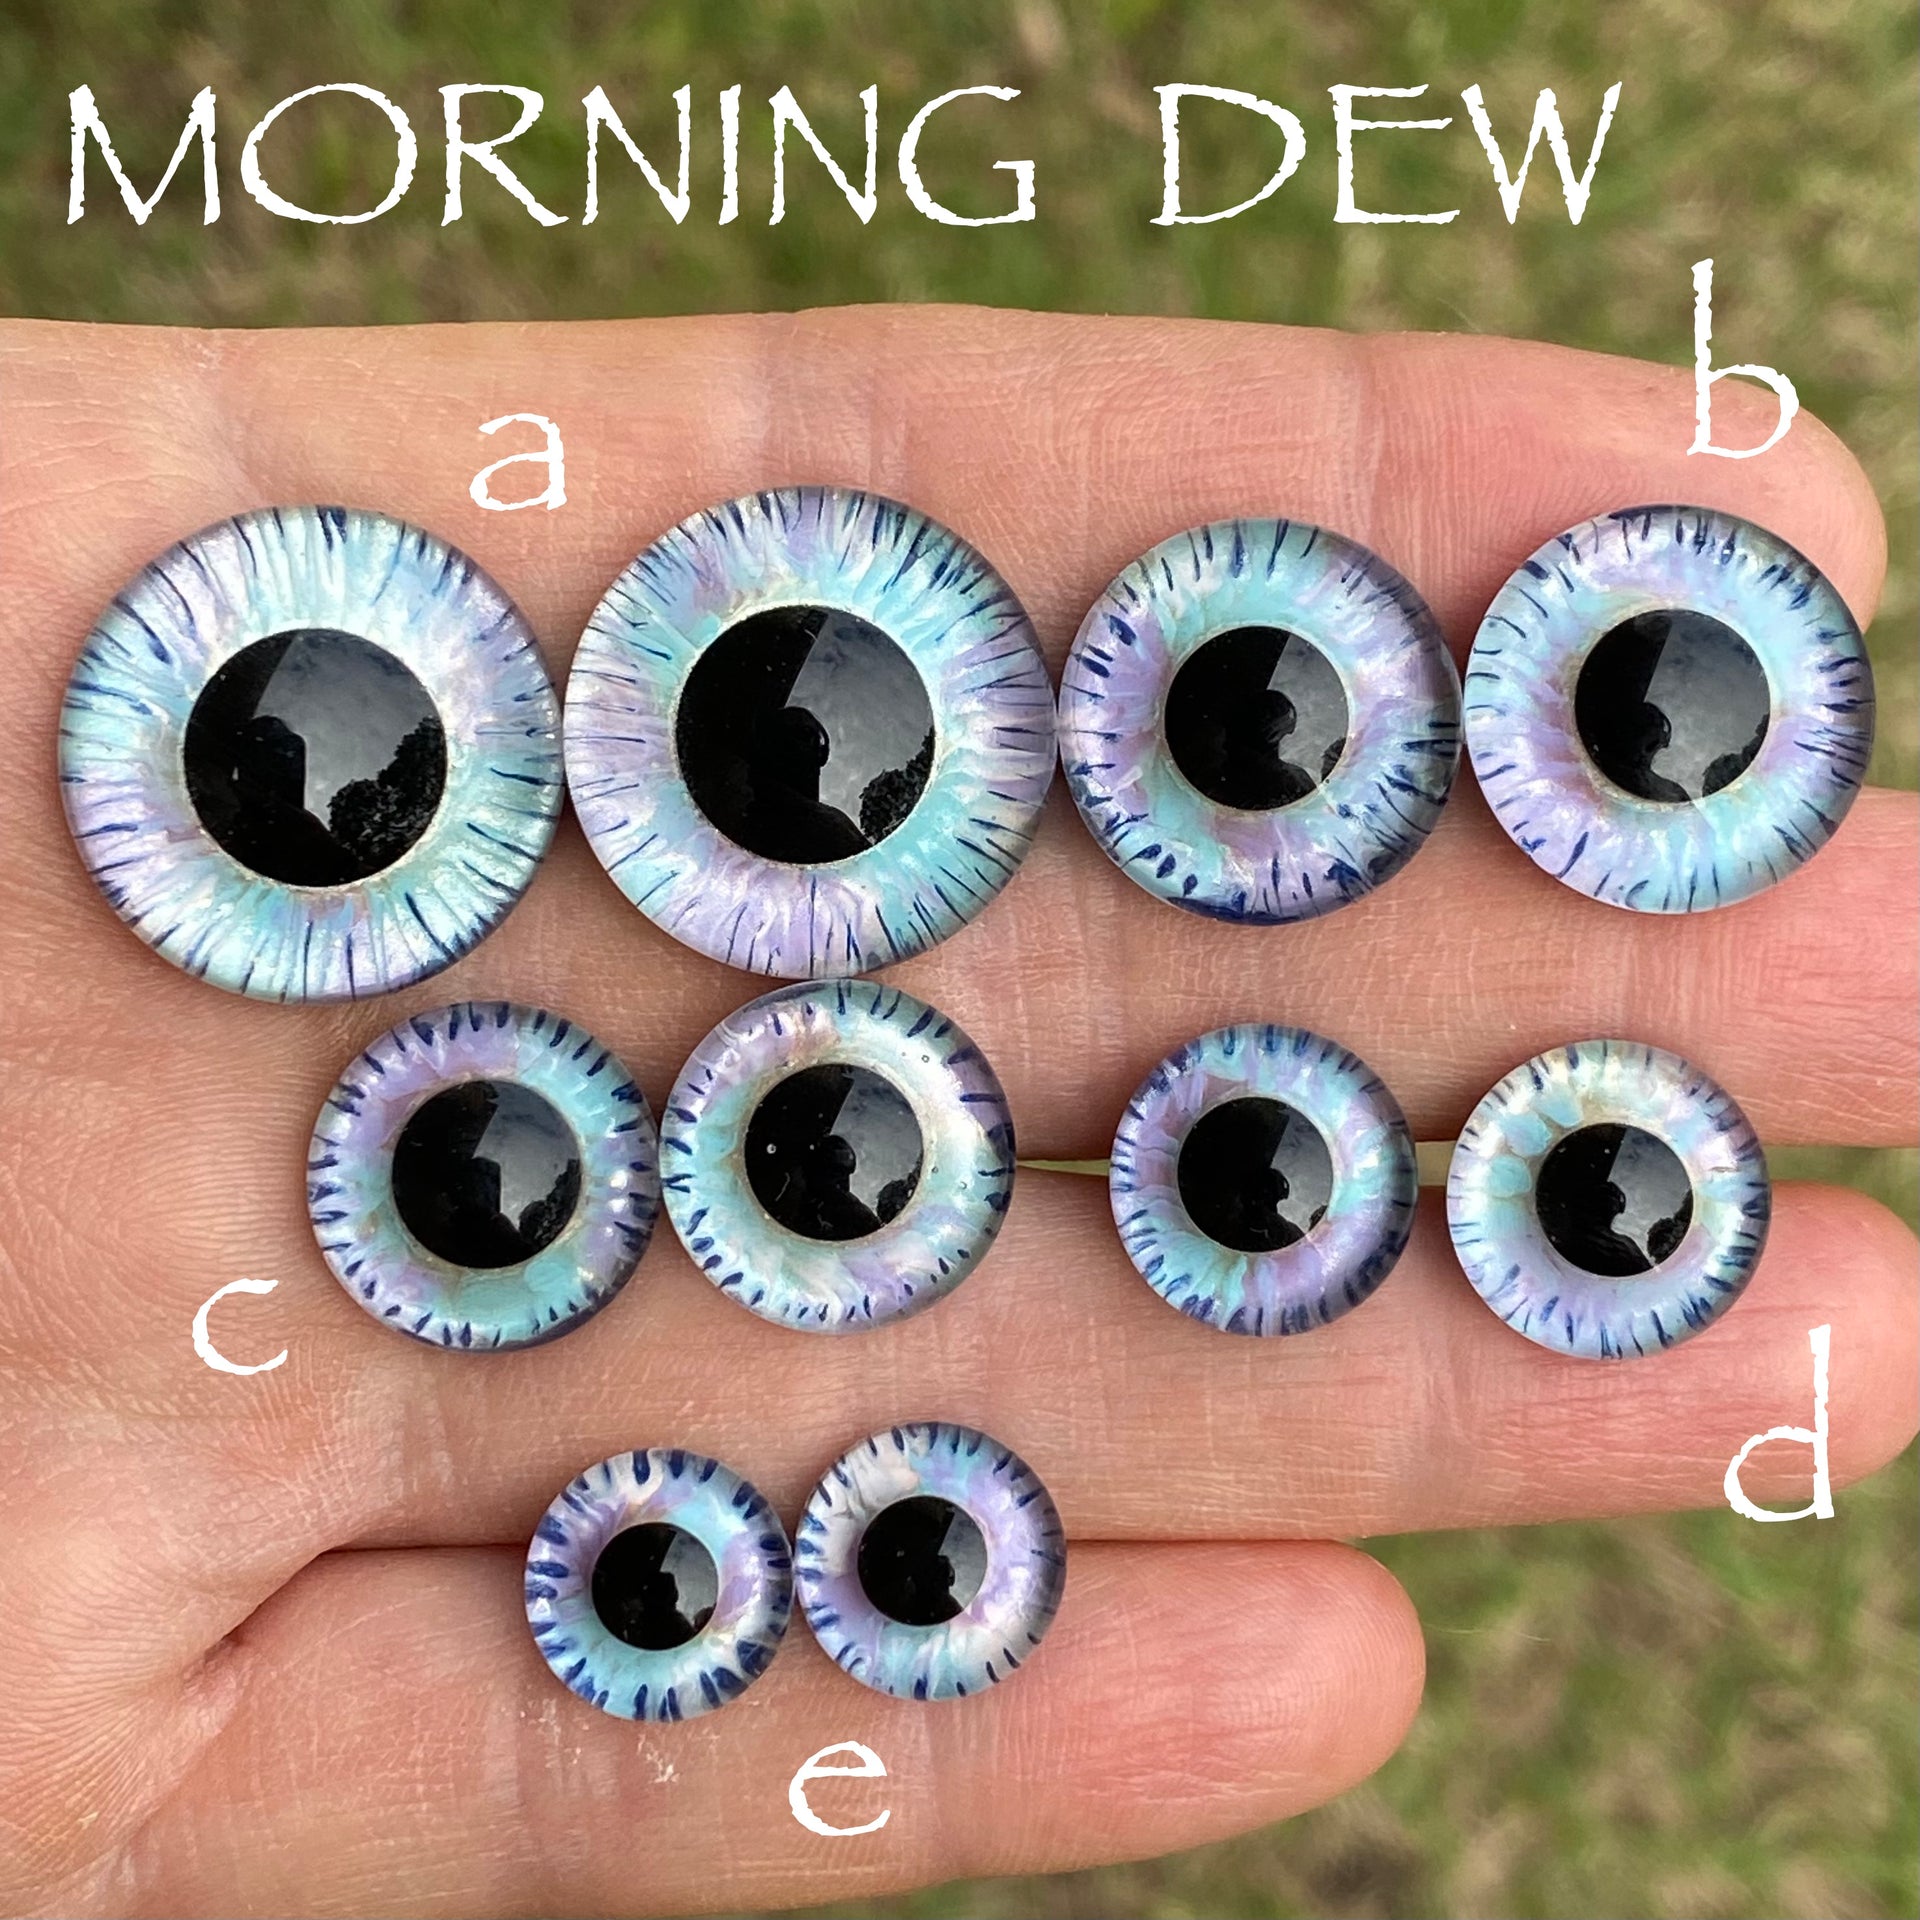 Hand Painted Eyes - Morning Dew